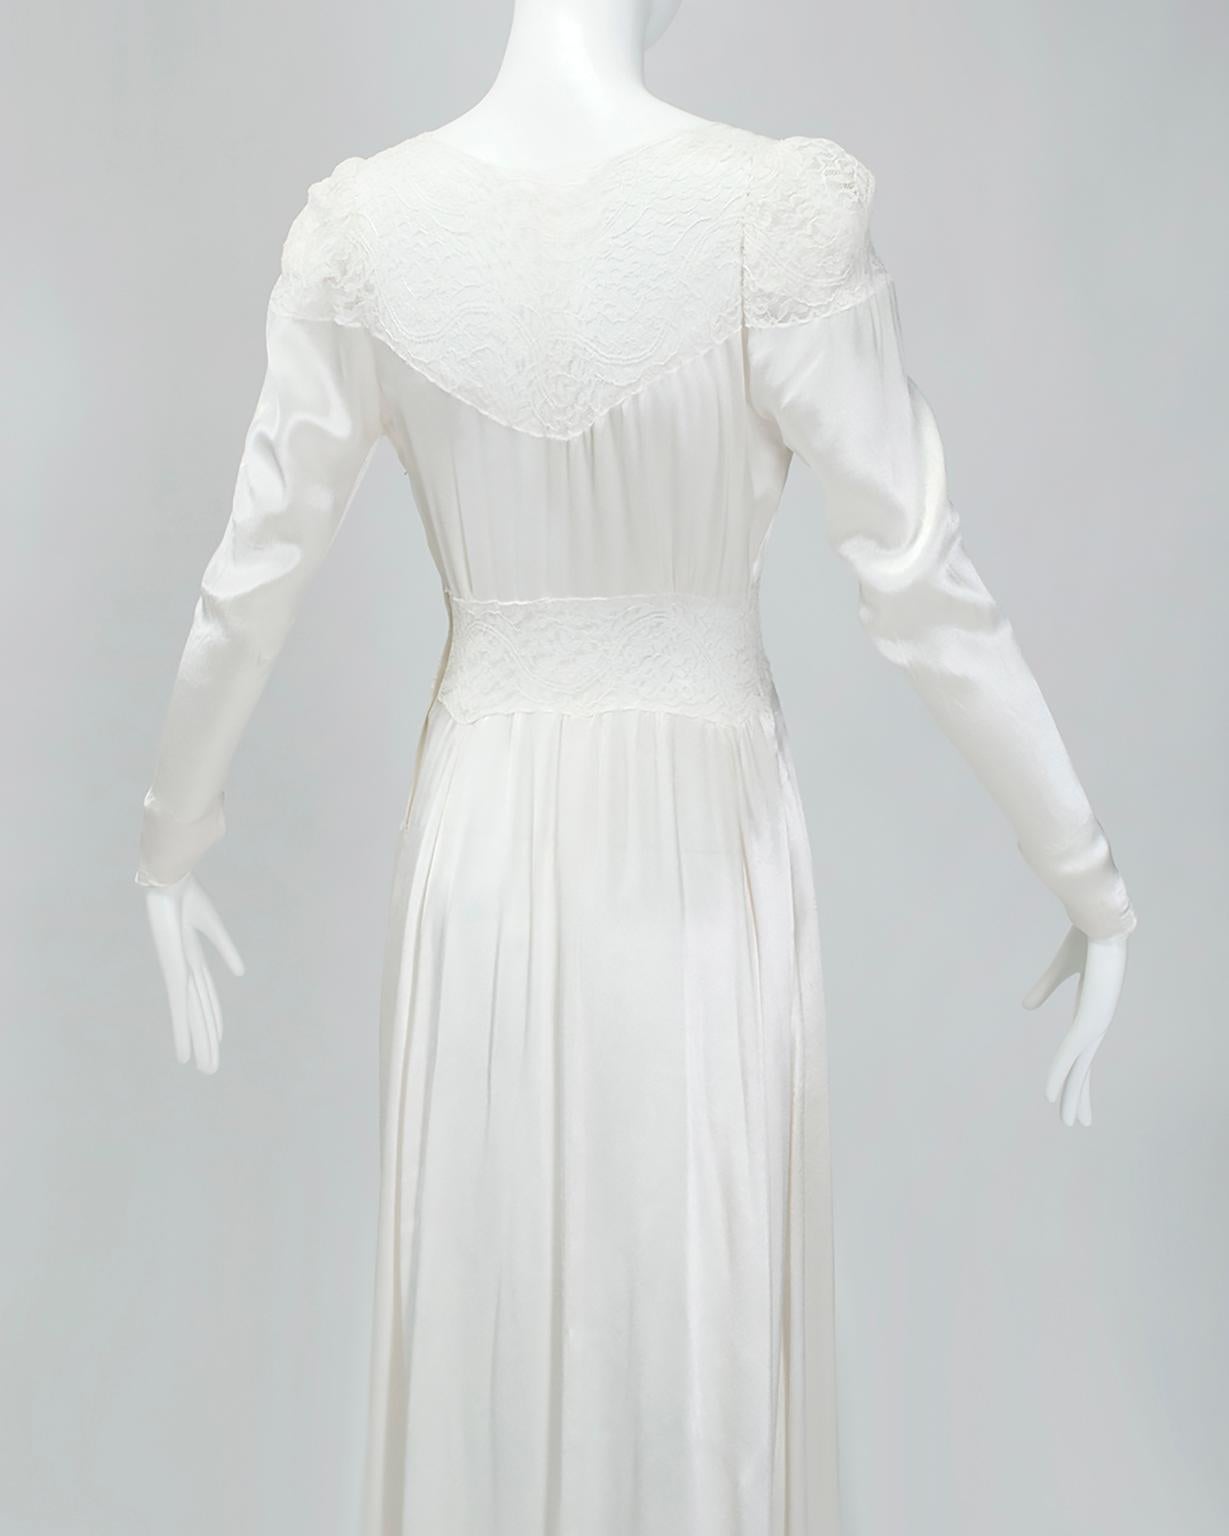 Nearly Naked White Satin Deco Wedding Gown w Transparent Lace Panels - XS, 1930s For Sale 2